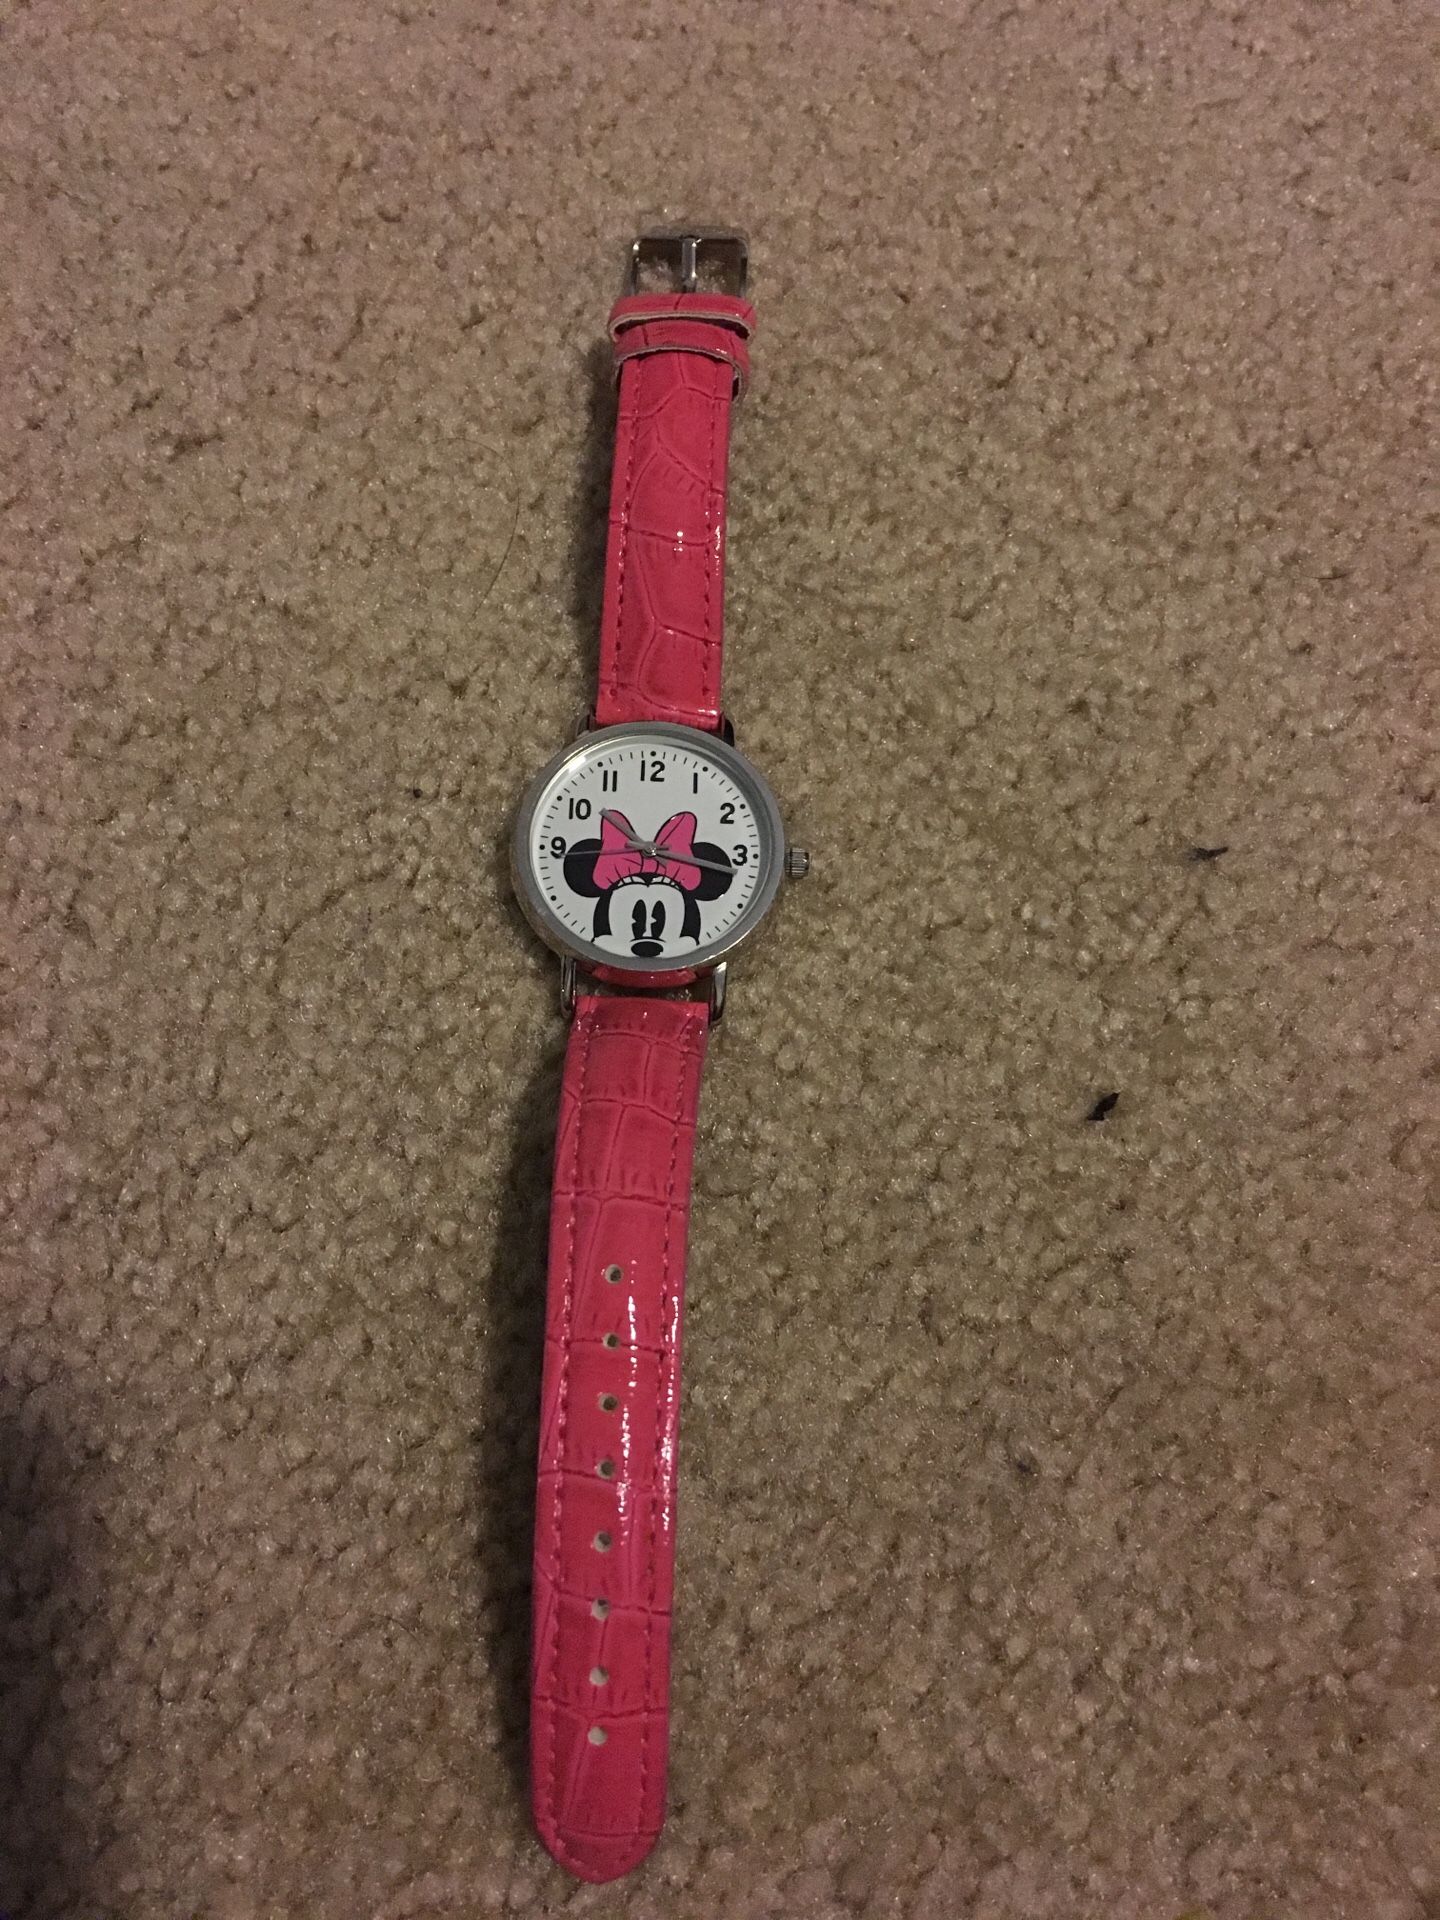 Minnie mouse watch